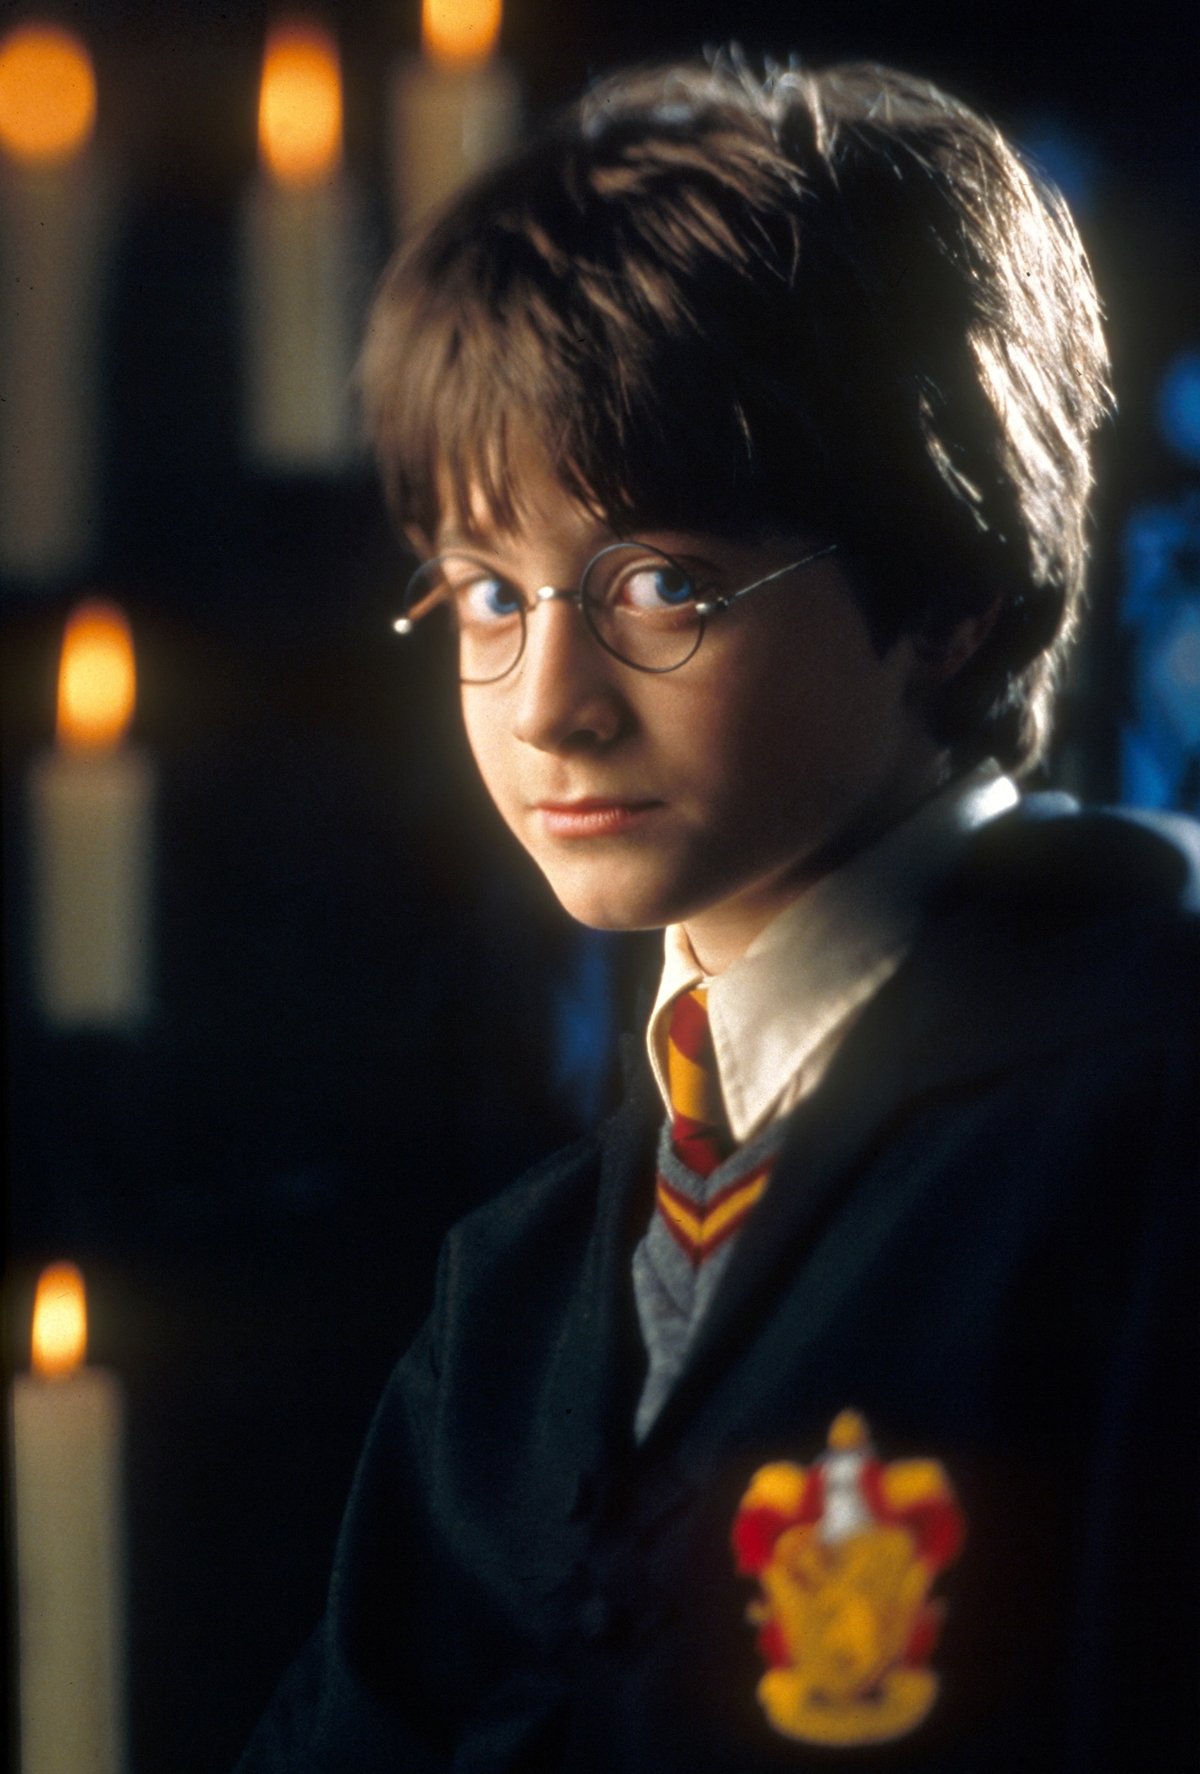 Daniel Radcliffe was 12 years old when the first Harry Potter movie based on J. K. Rowling